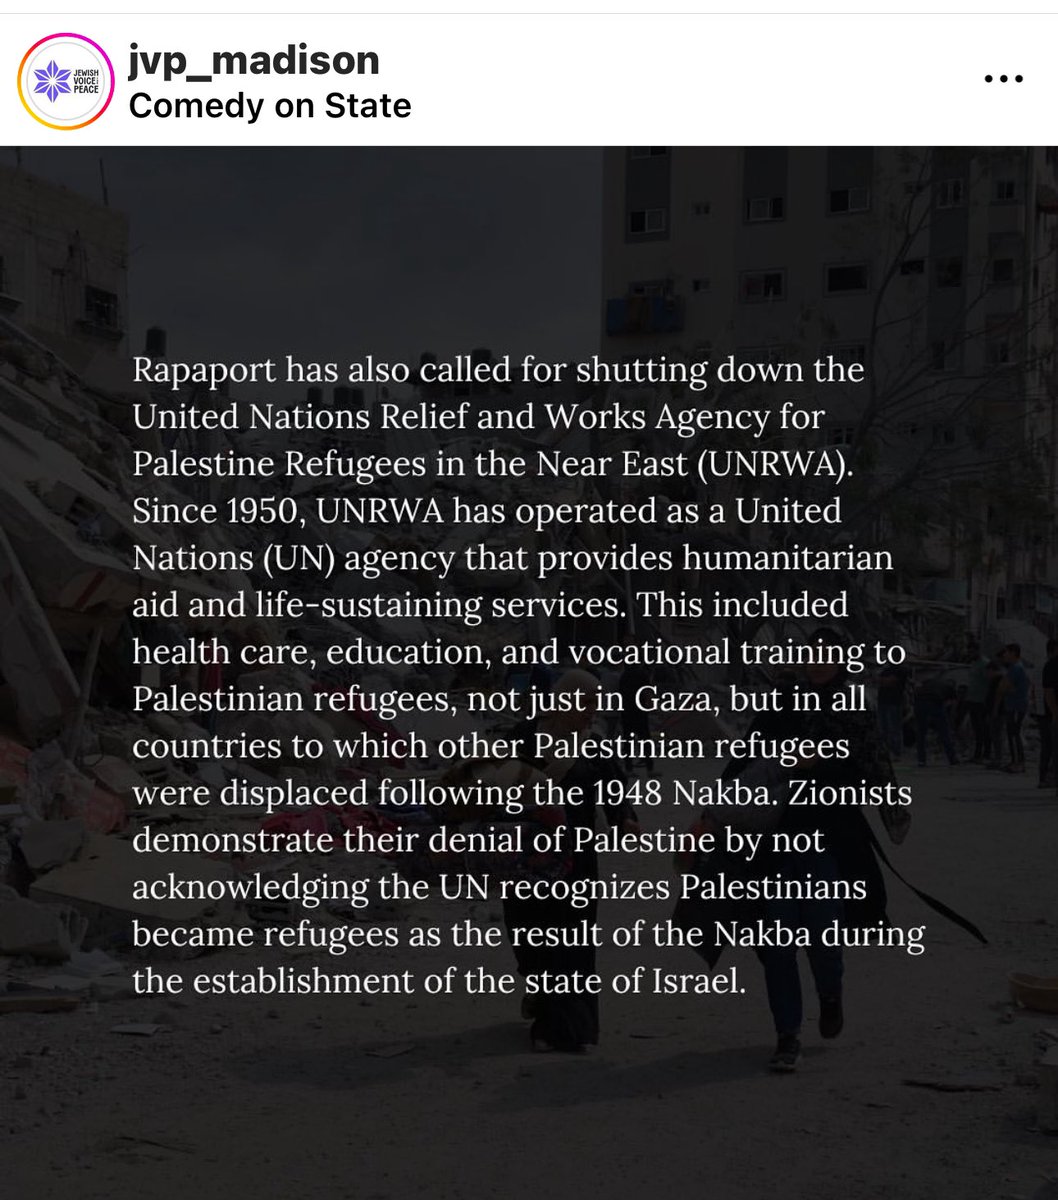 I am not backing down because of threats, period & I’ve gotten tons. It's essential to stand firm and resolute right now. I haven't done anything wrong and won't accept the idea that supporting Jews/Zionists/Israel is wrong or deserves “cancellation” FOH. Whether my shows are…